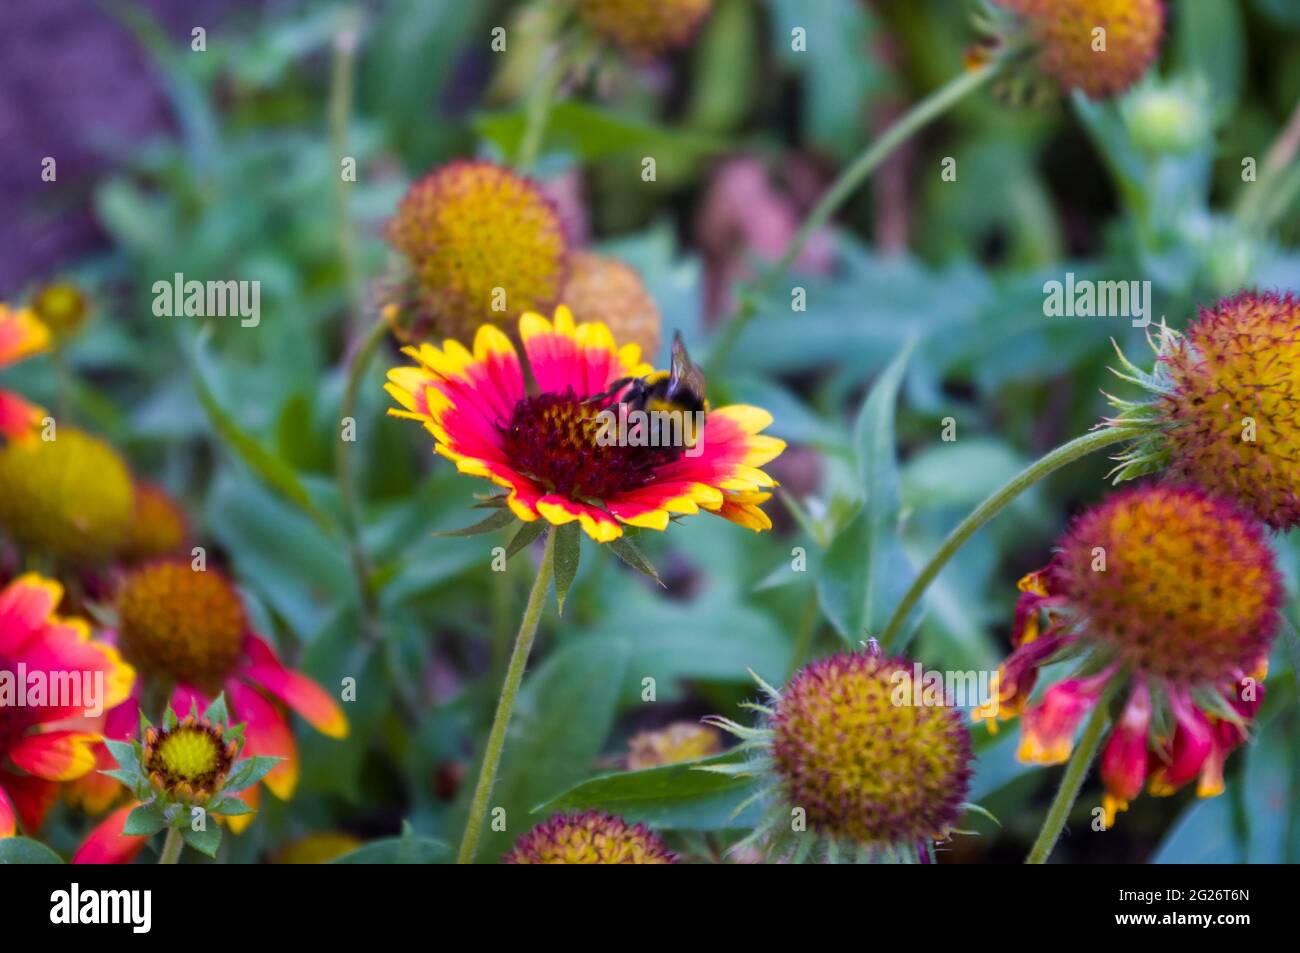 Red and yellow colorful flowers Gailardia in garden, pollination by bees, closeup Stock Photo